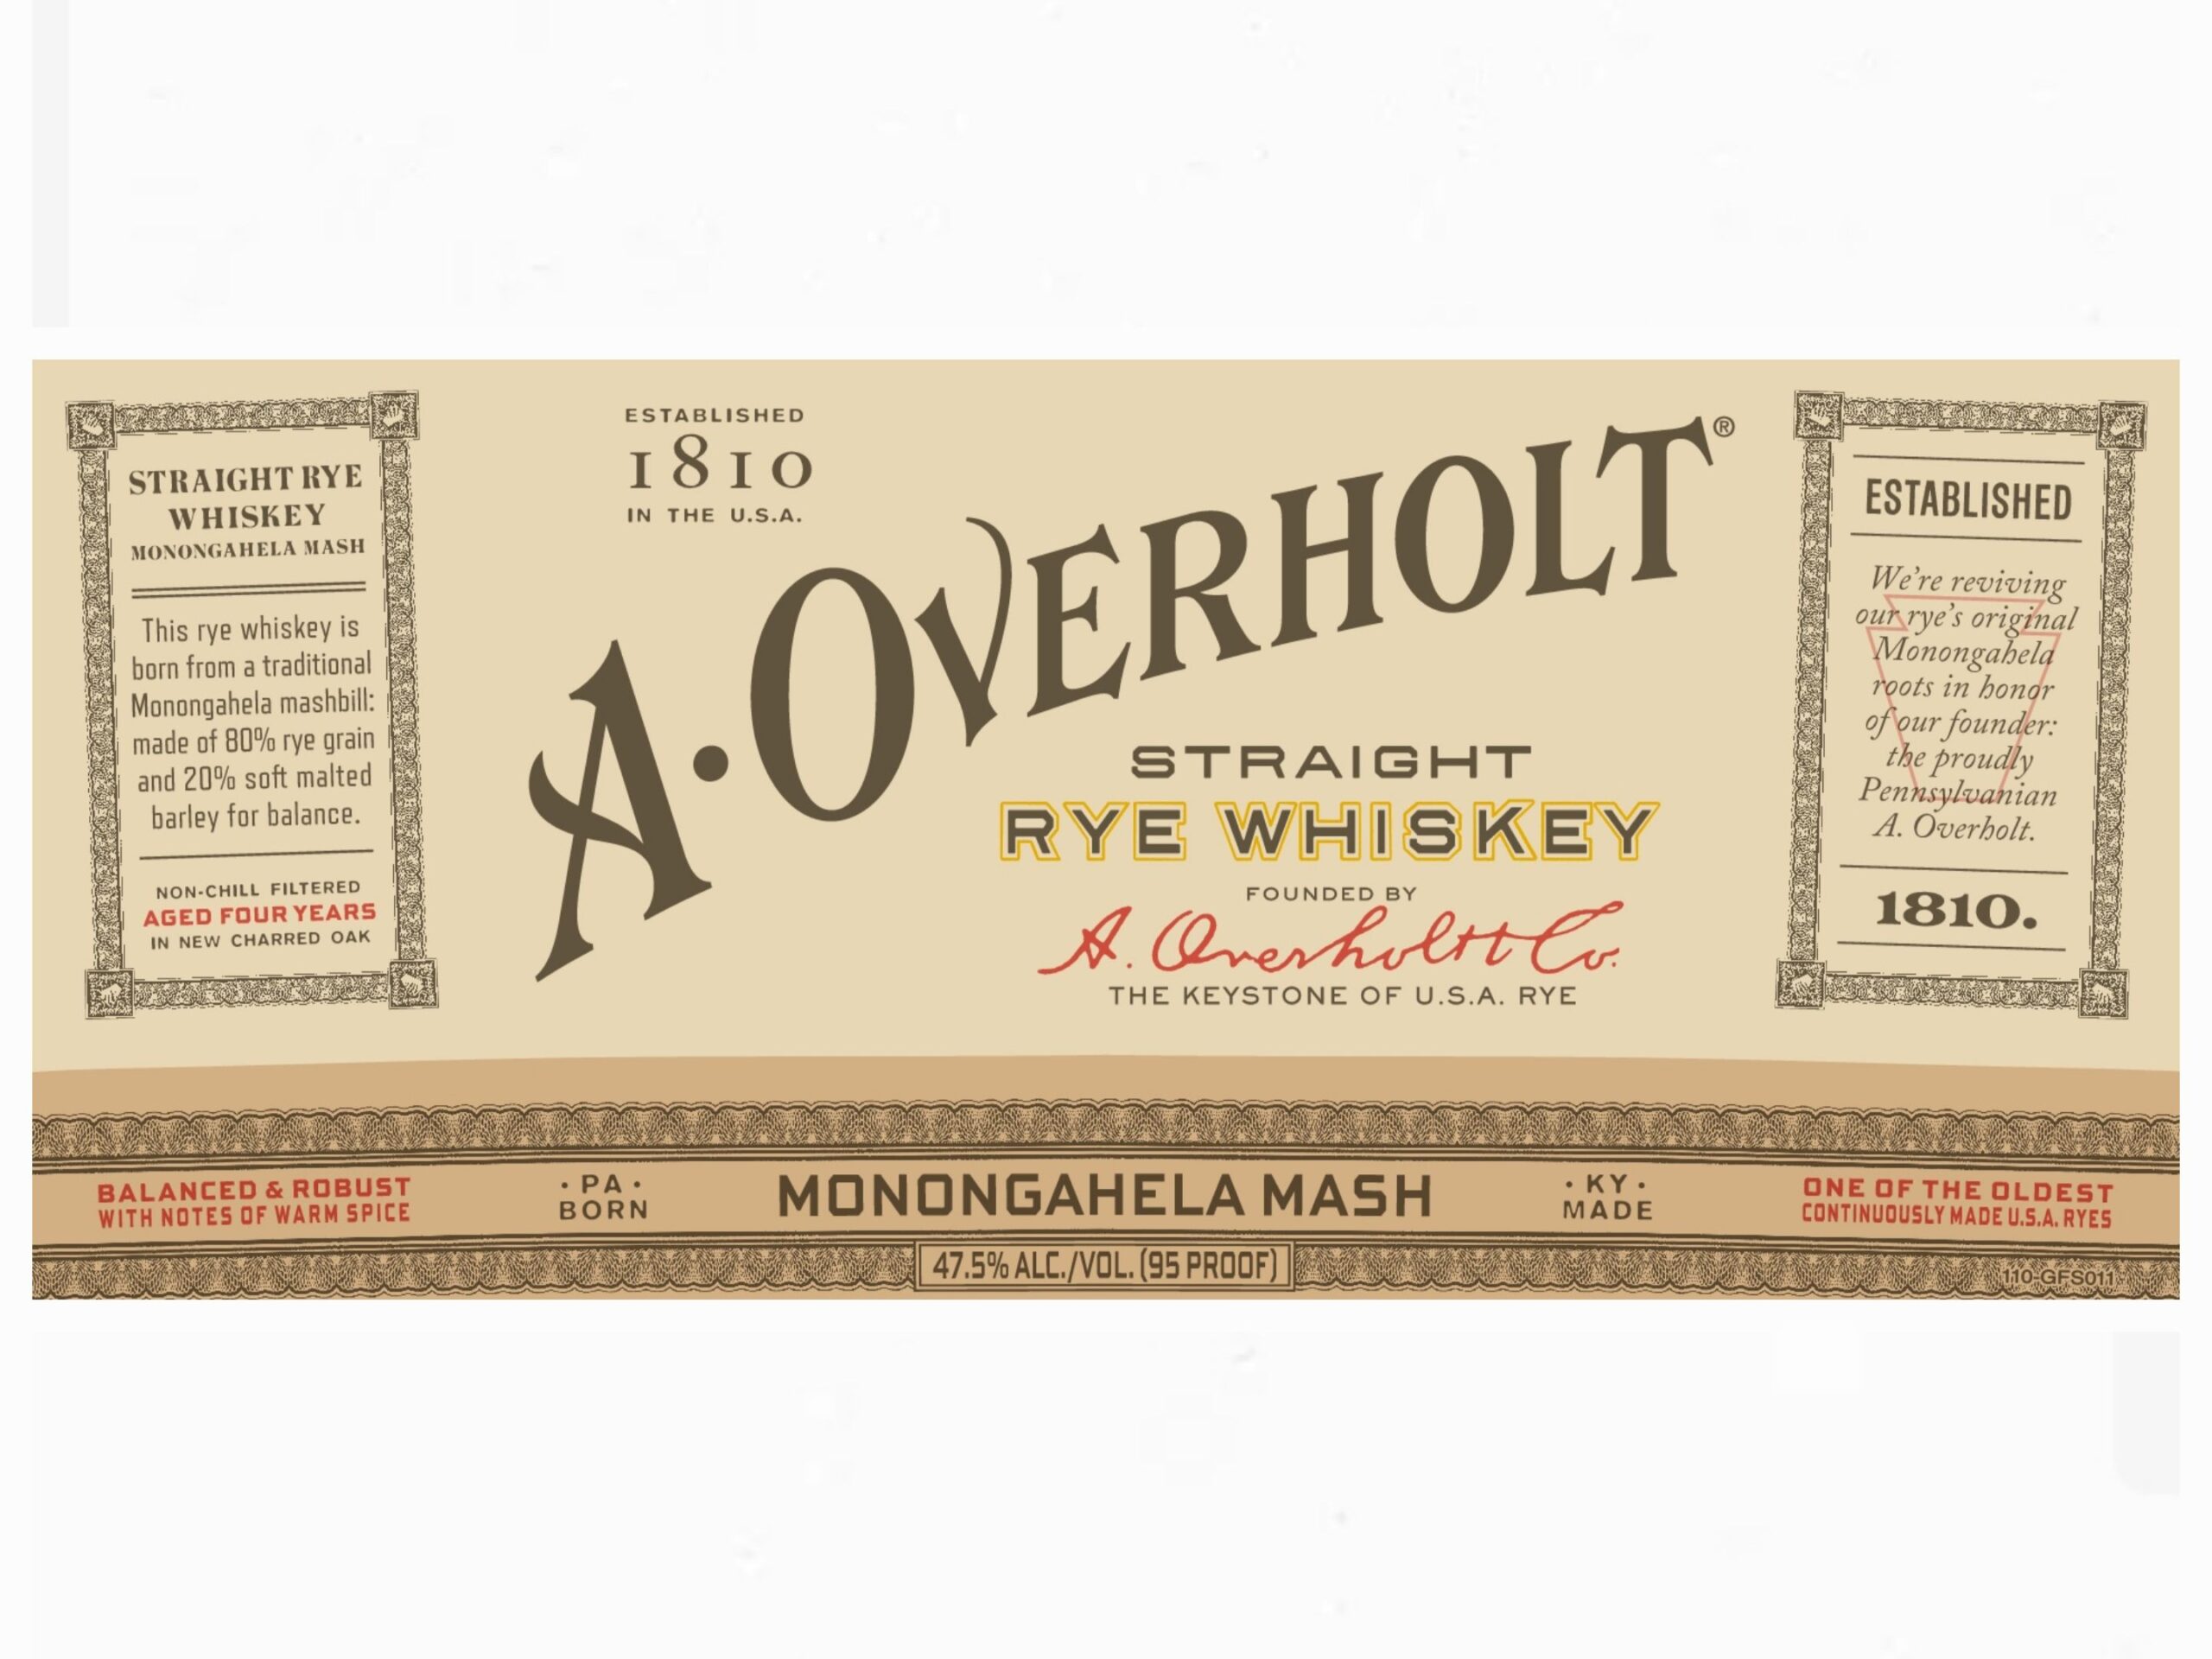 New Old Overholt label shows that Jim Beam really is listening to us!